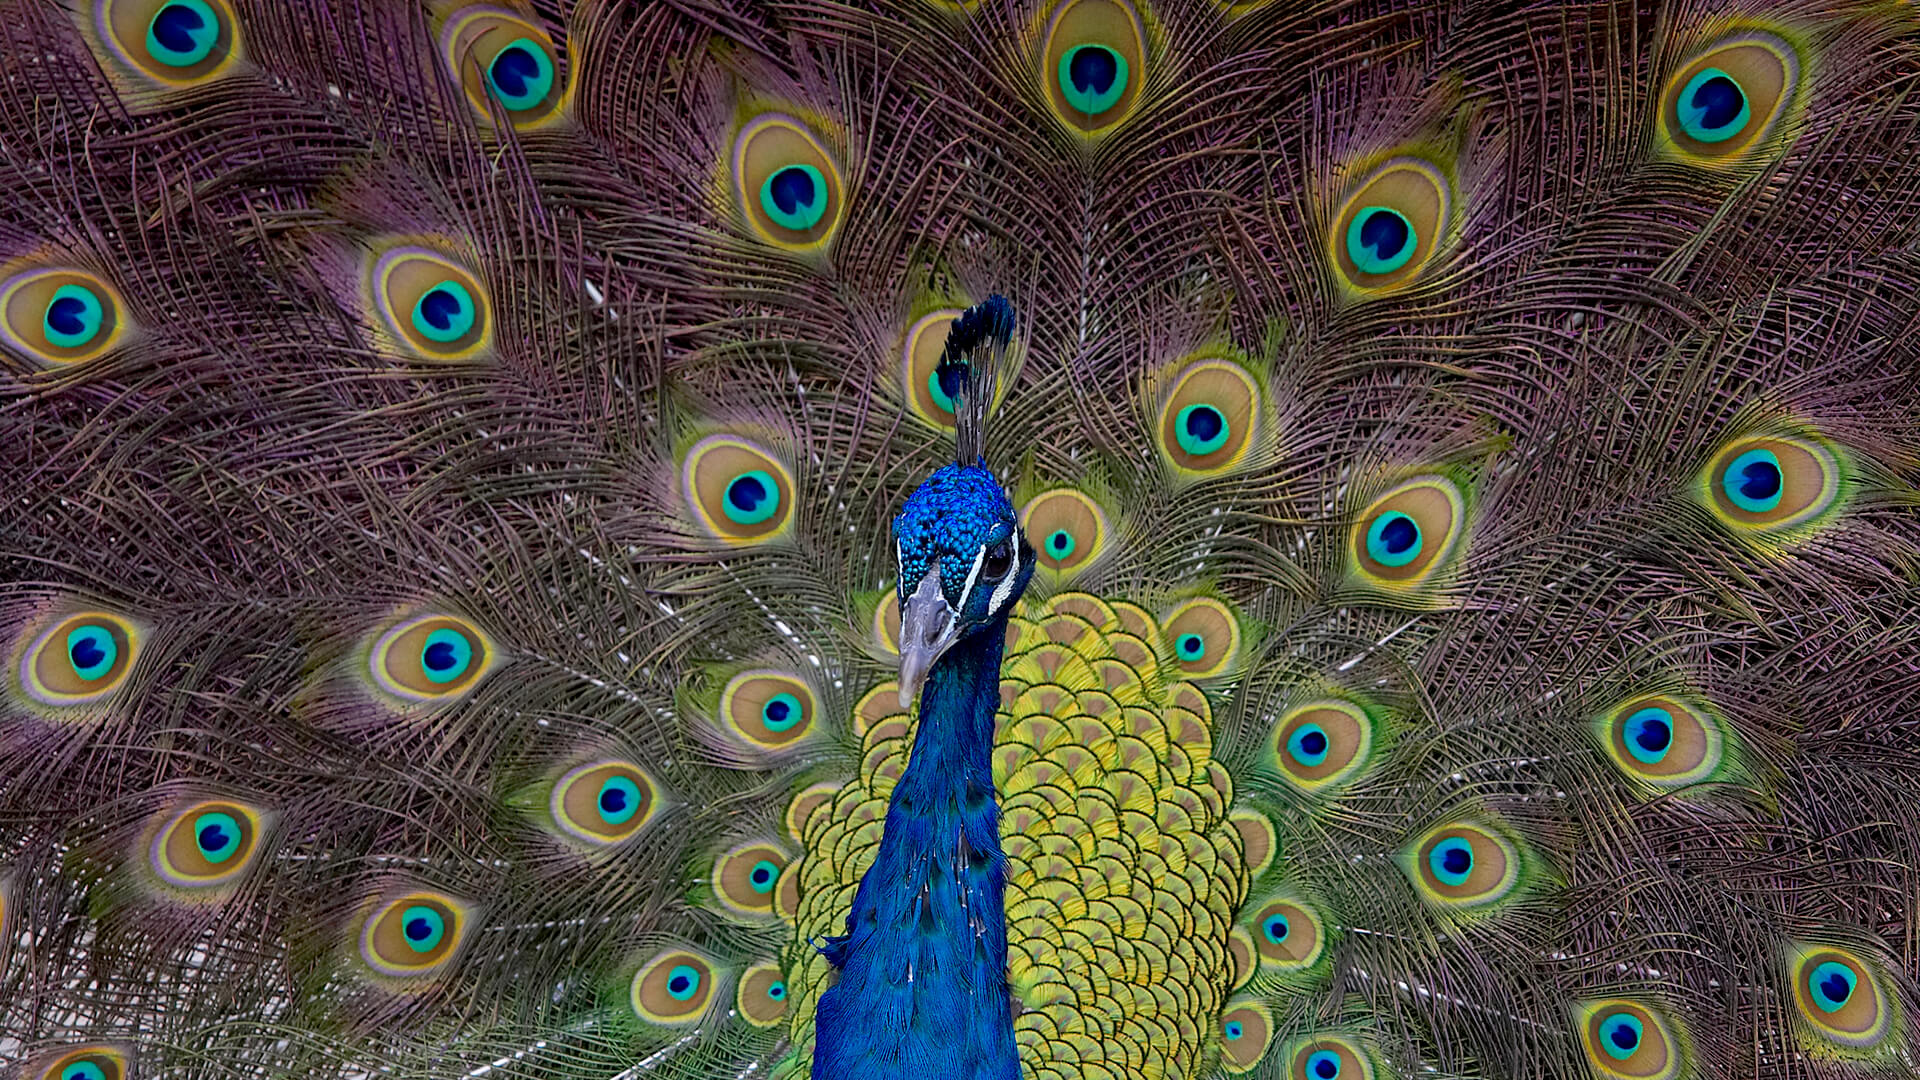 Peacock with tail feathers on display.